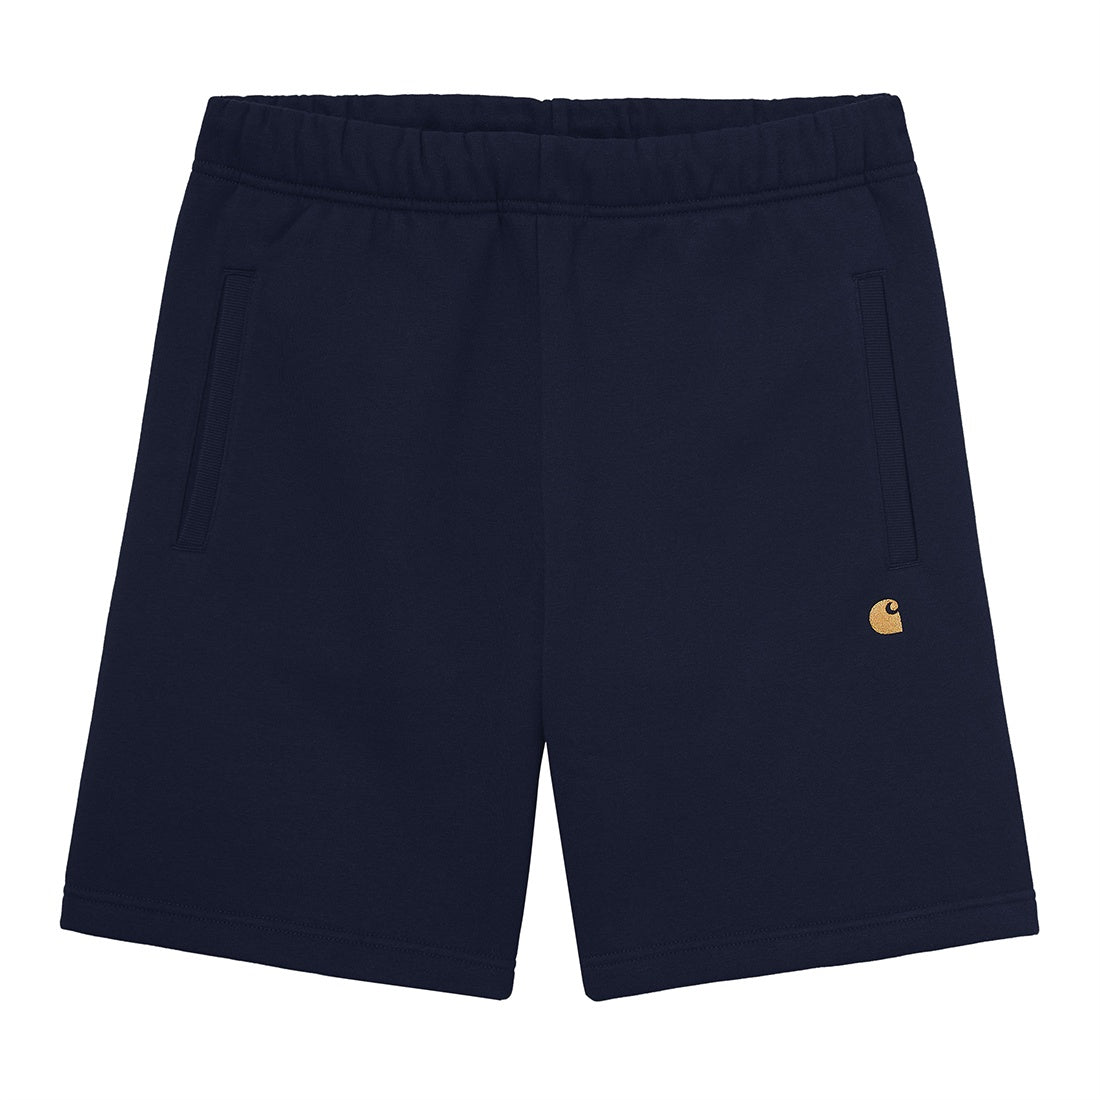 Chase Sweat Short Navy Gold